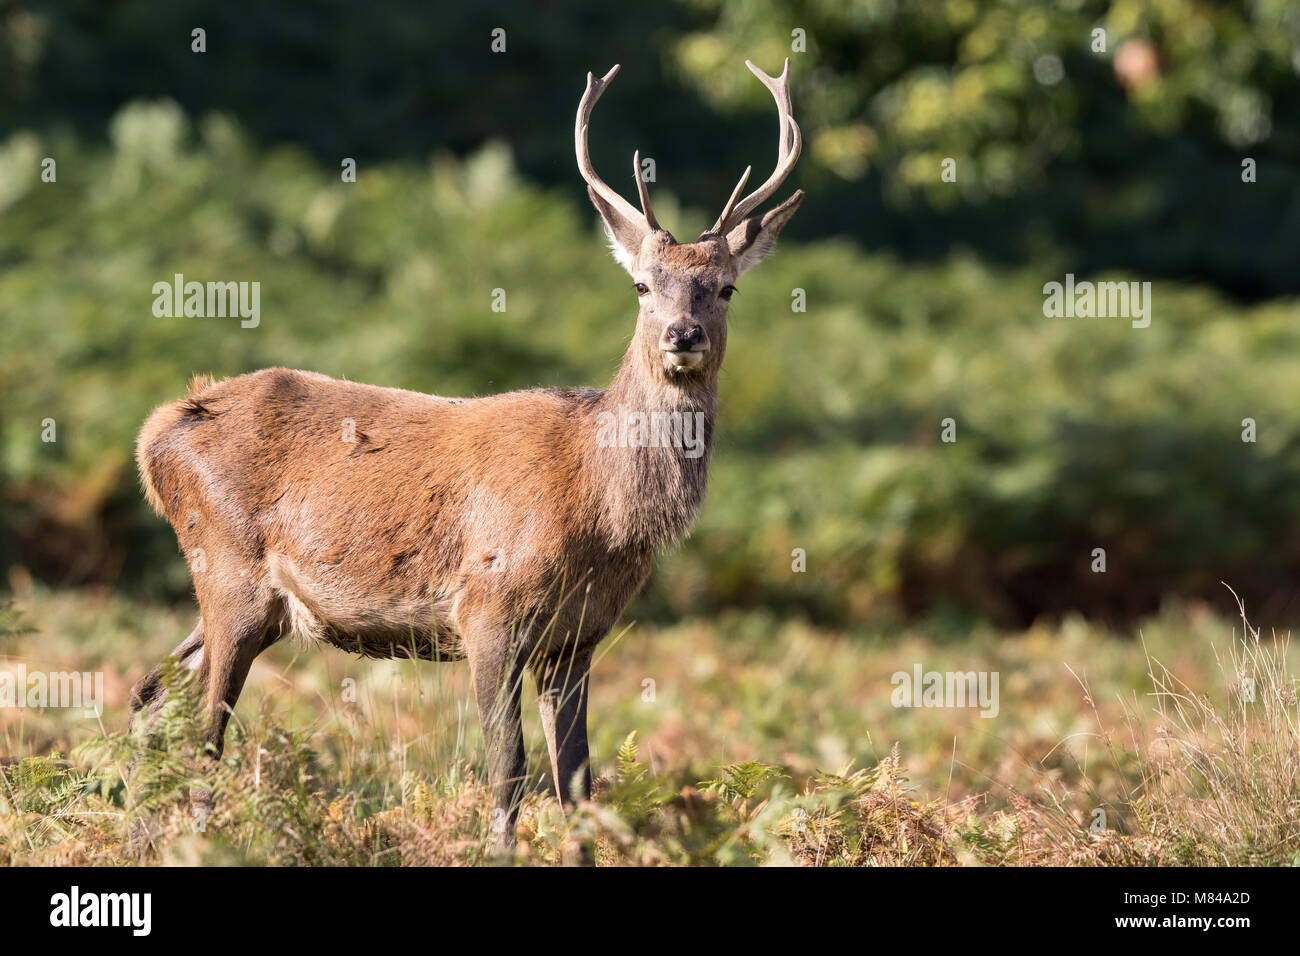 Wild UK red deer stag with antlers (Cervus elaphus) isolated outdoors standing in autumn sunshine staring. British deer in rutting season. Stock Photo